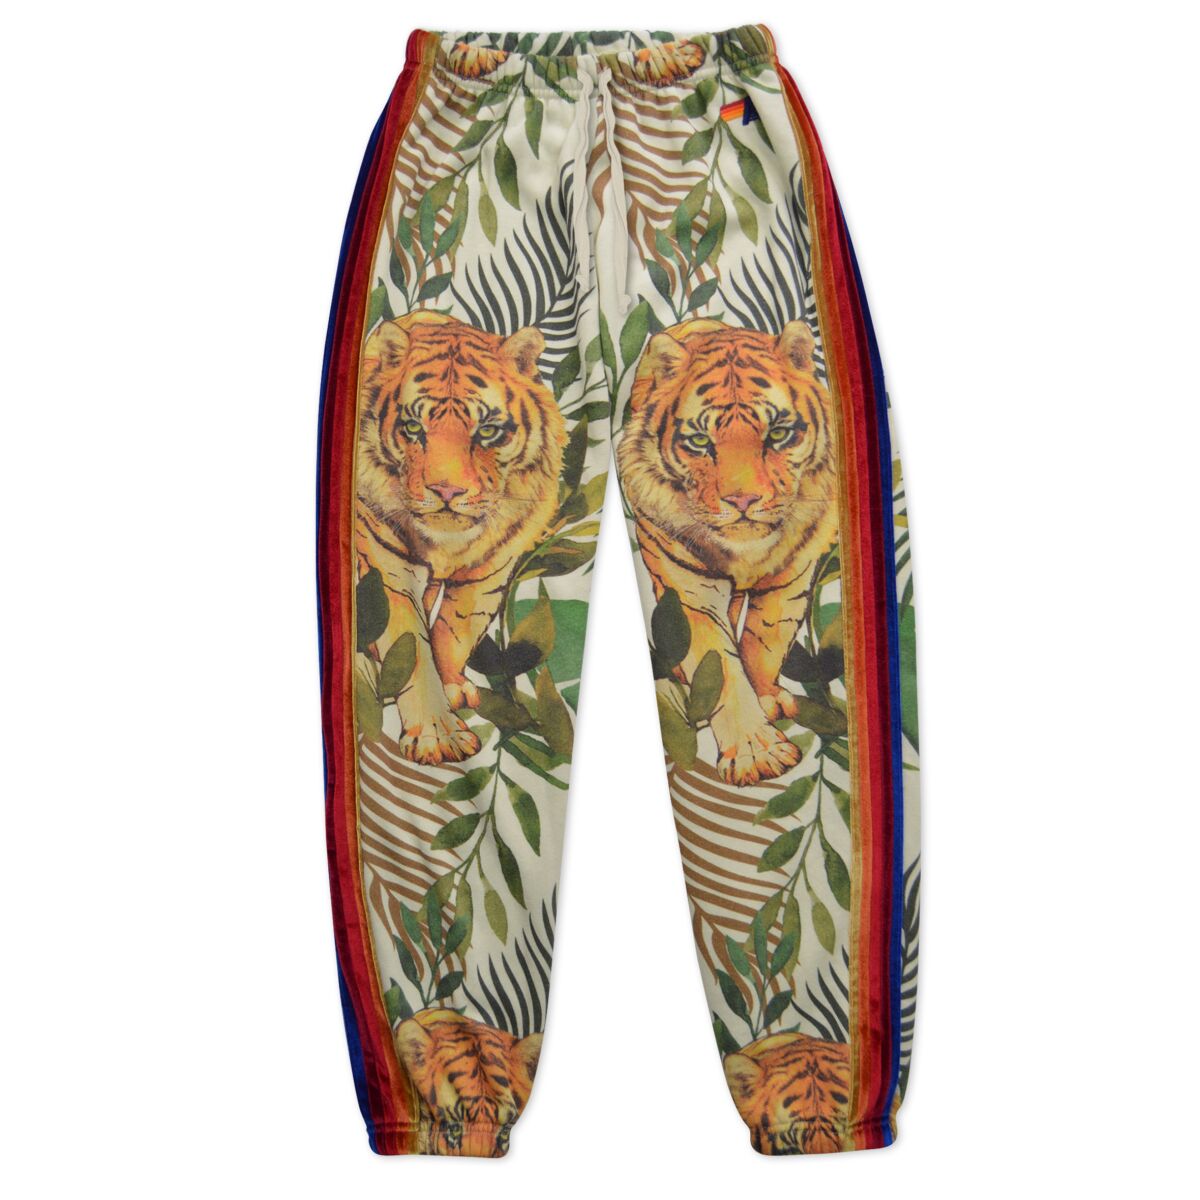 Sweatpants with a tiger-and-leaf design